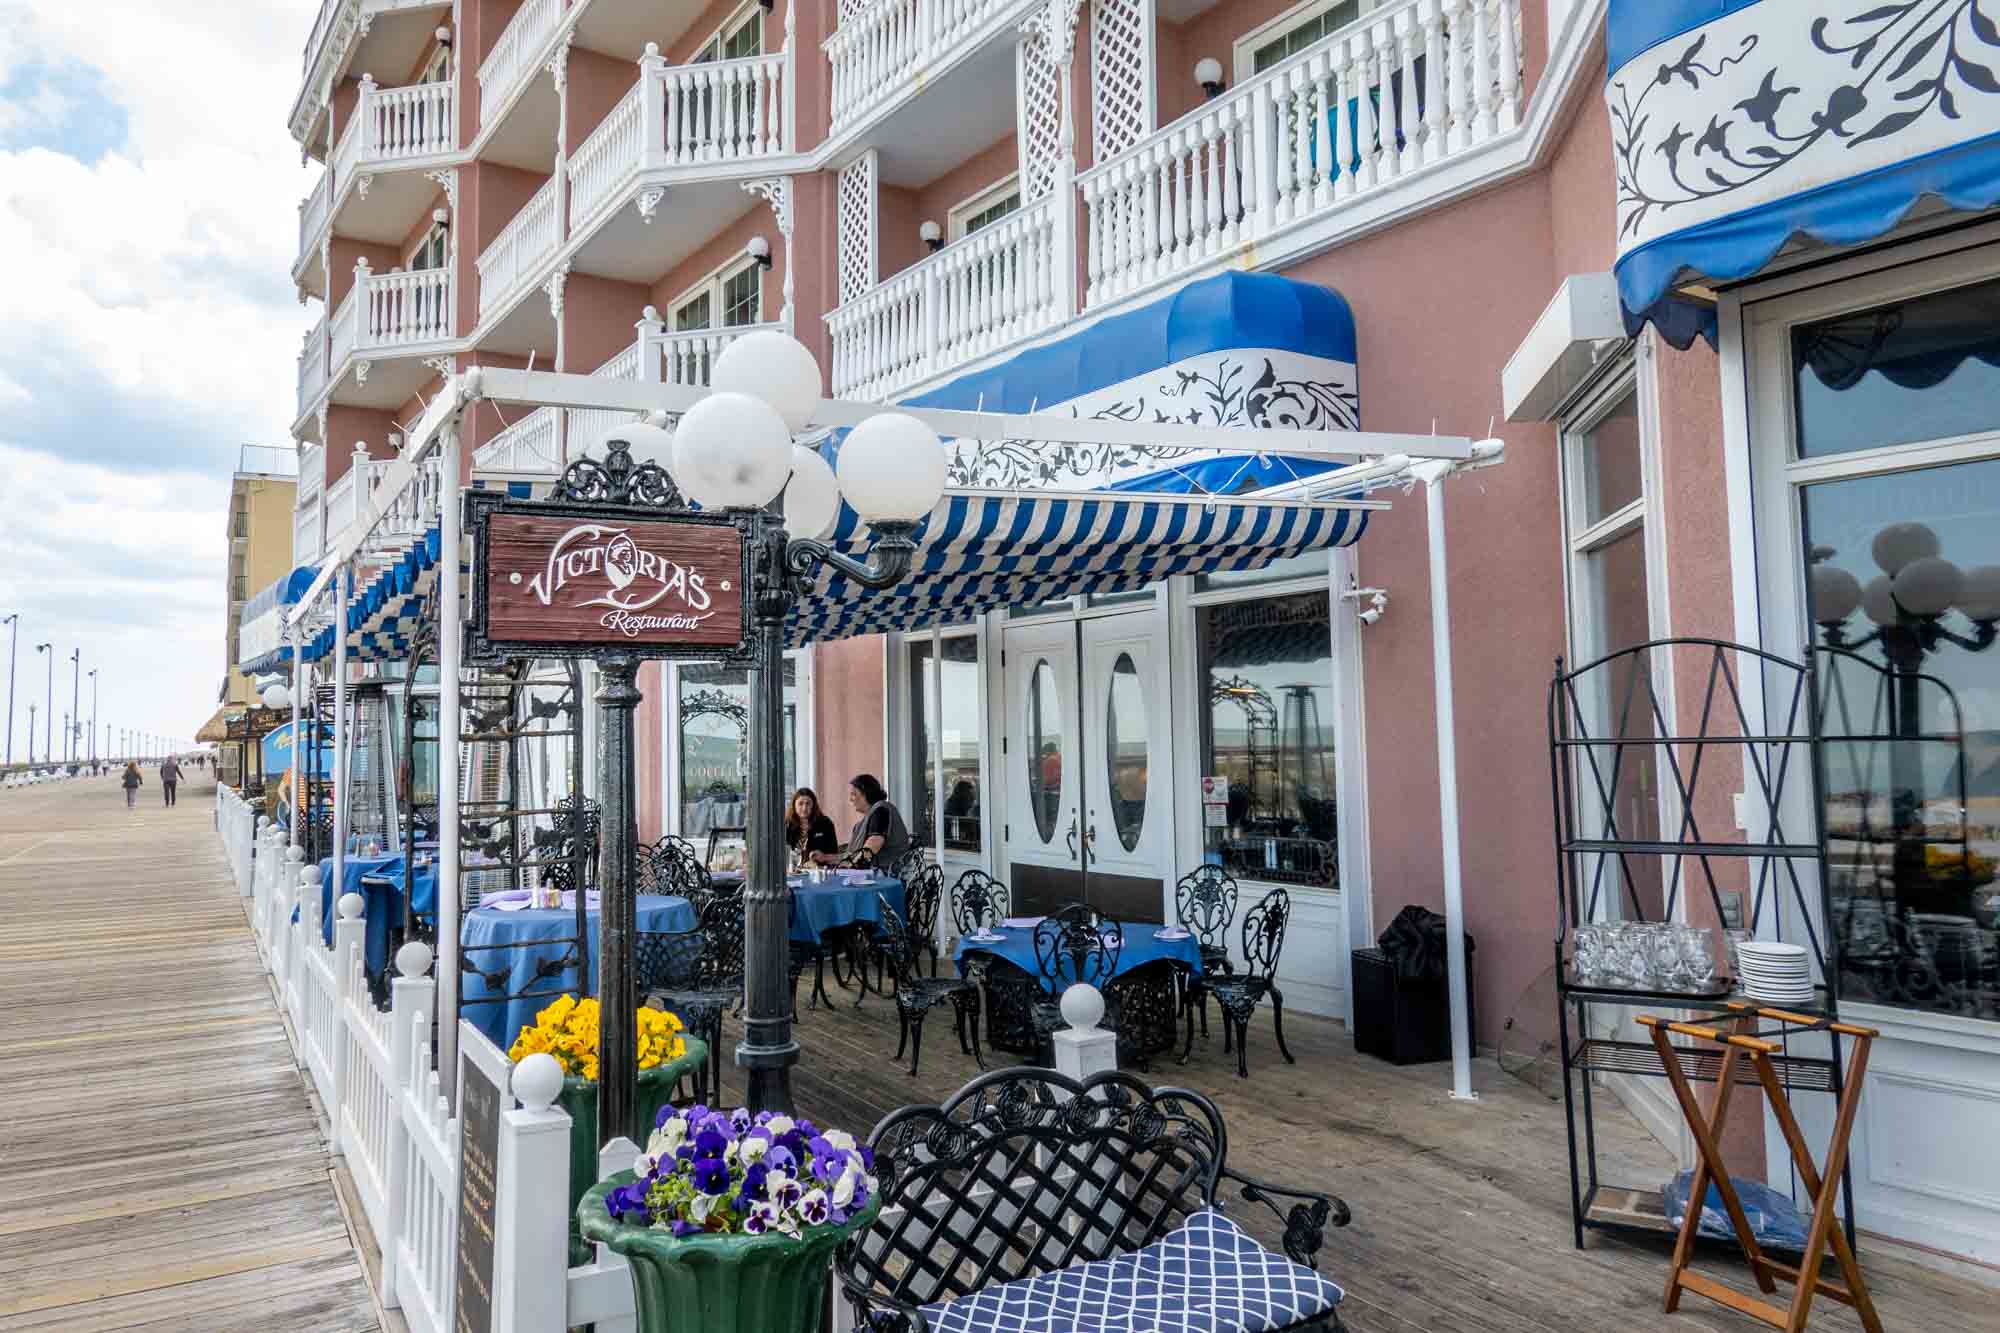 Boardwalk cafe with Victorian decor 